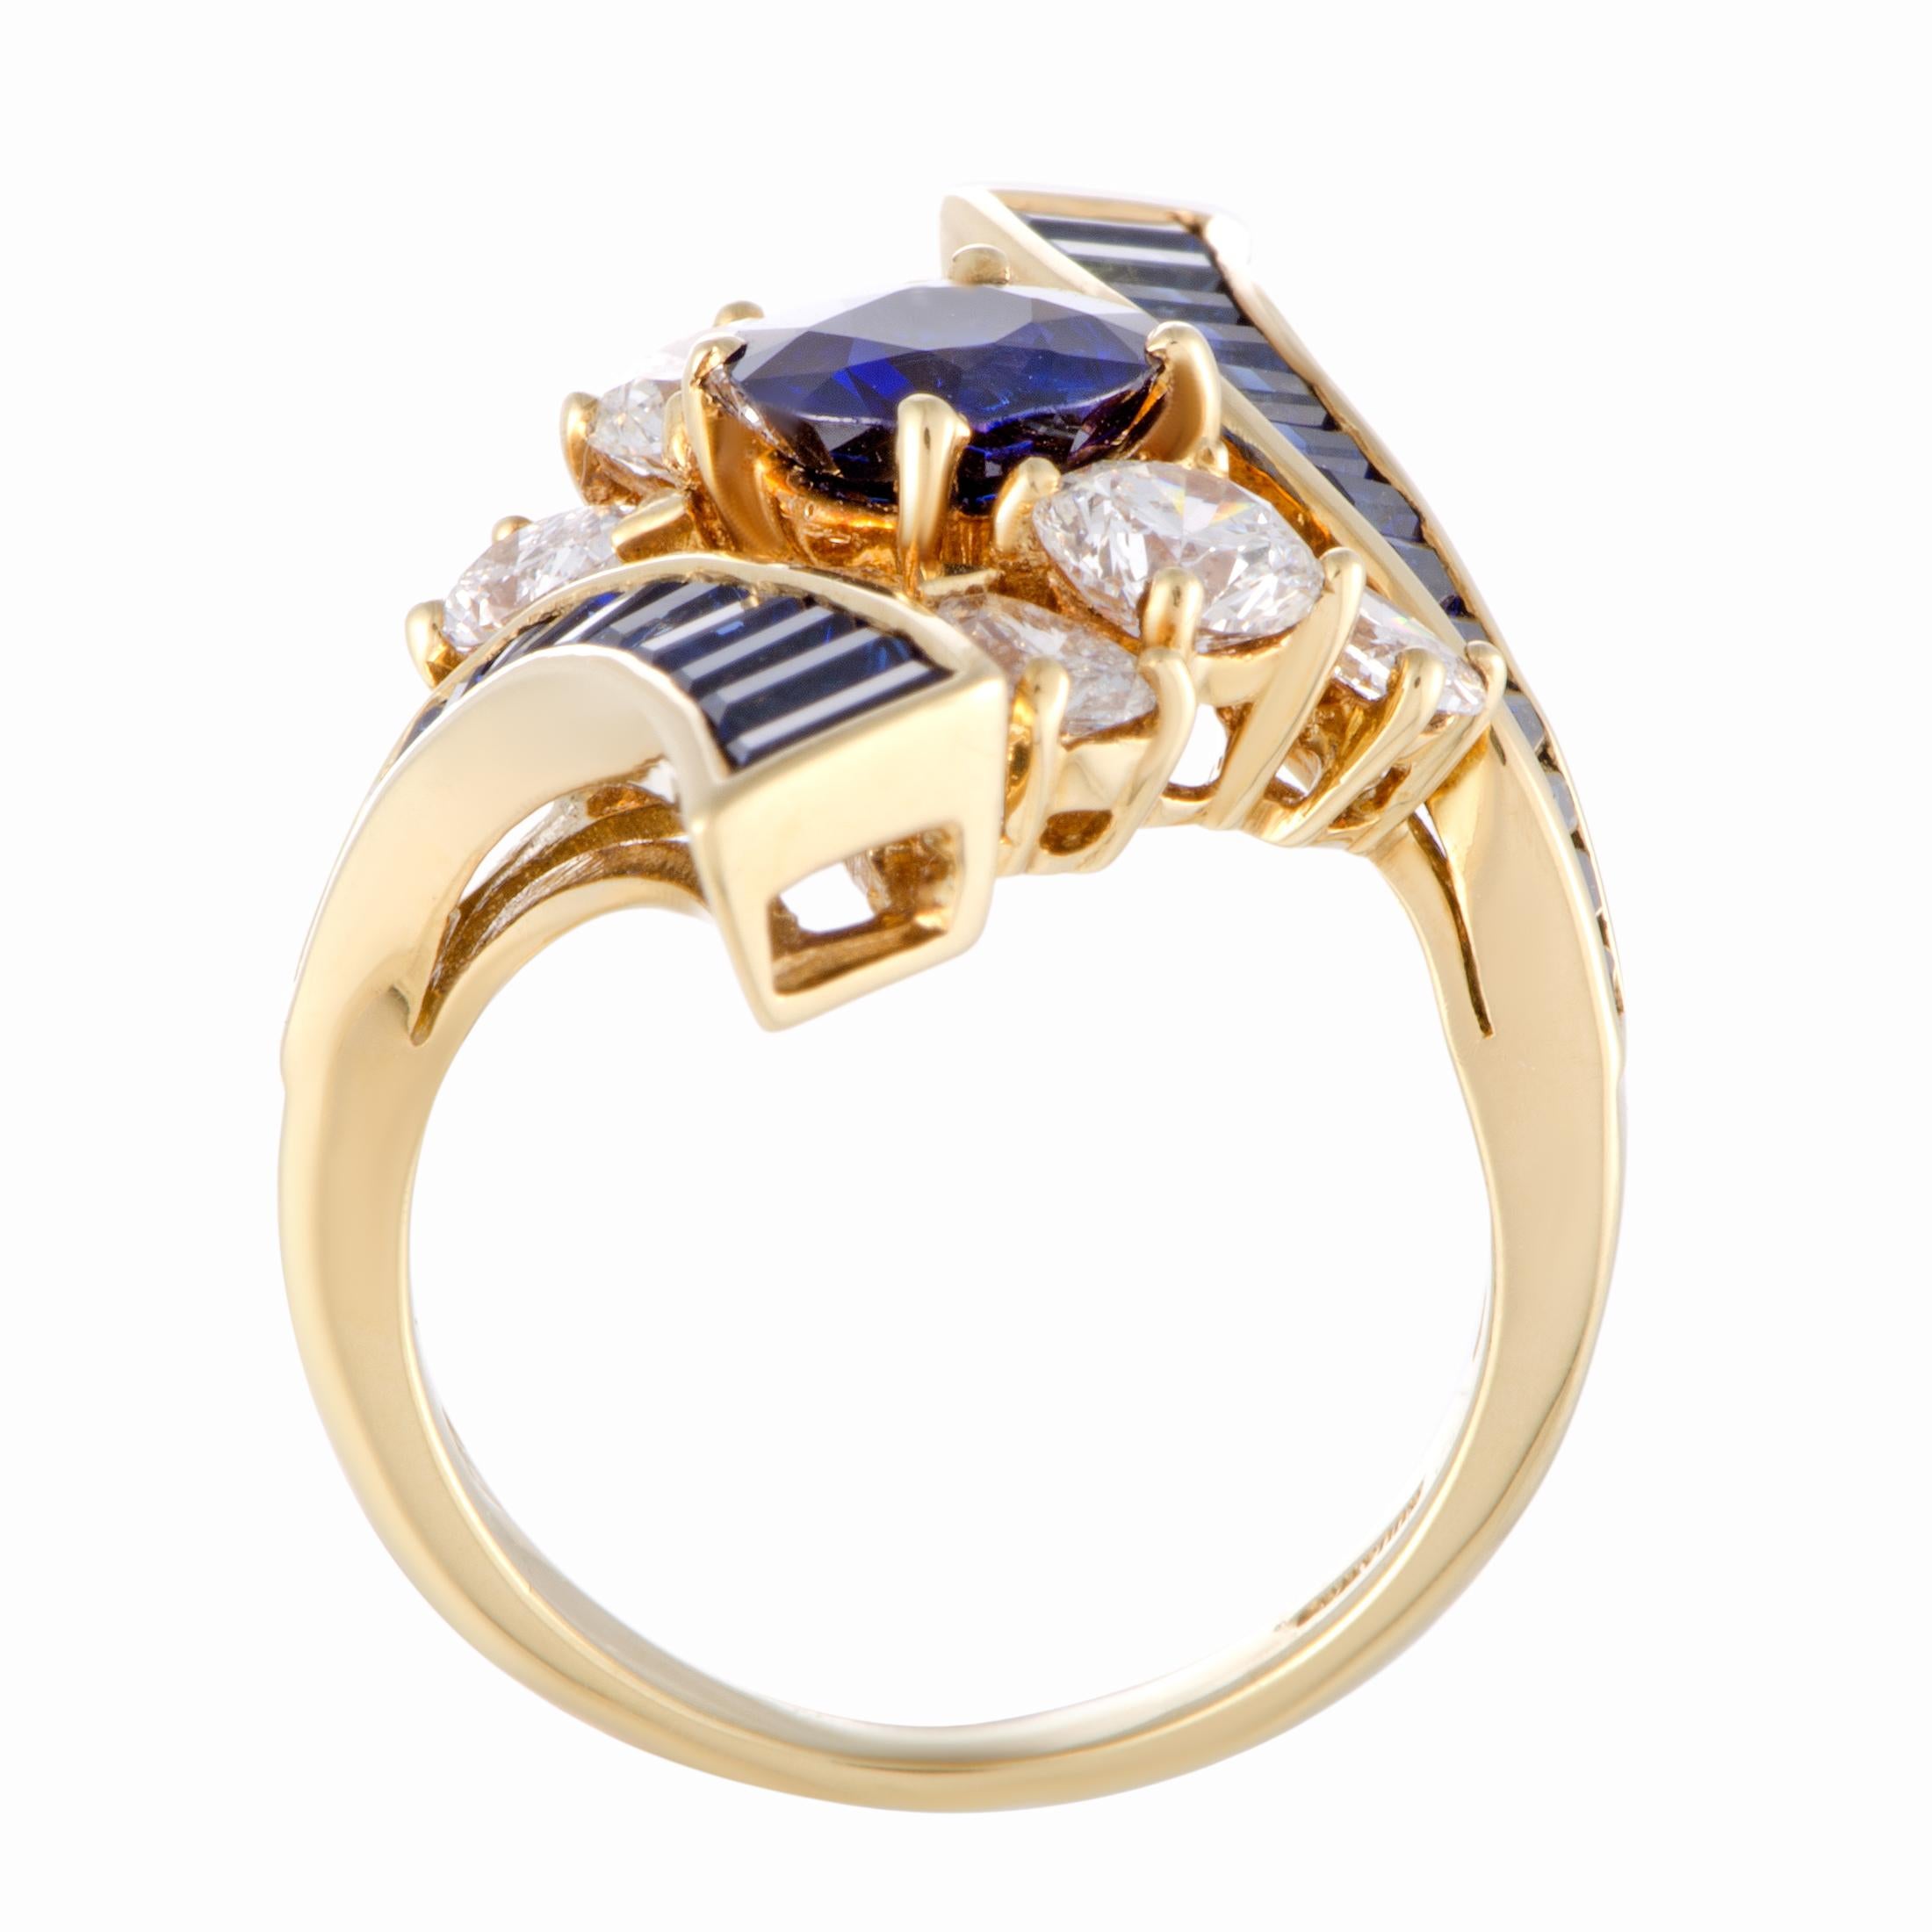 Evoking the ever-enticing allure of antique design and royal jewels, this majestic 18K yellow gold ring presented by Mouawad will elevate your style in a most prestigious manner. The ring is embellished with approximately 4.20 carats of sapphires,